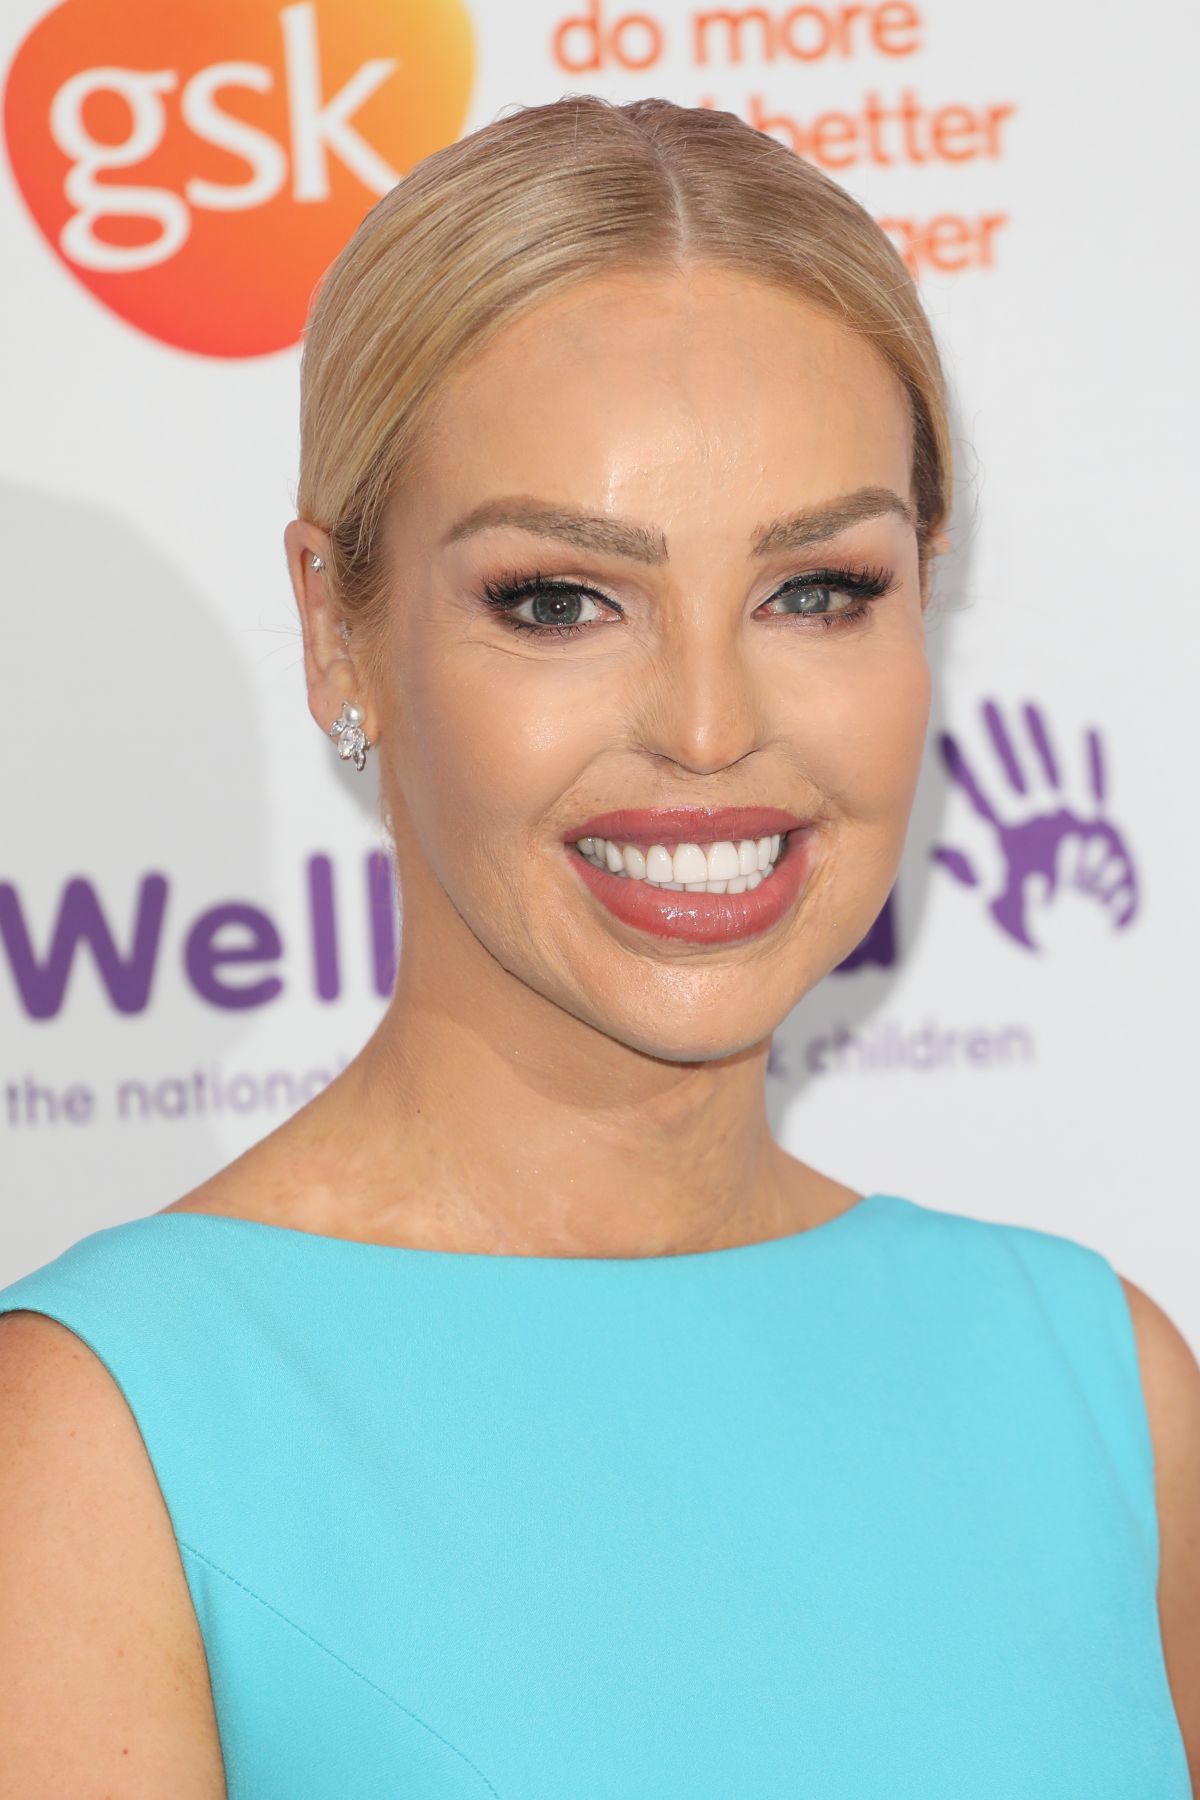 KATIE PIPER at Wellchild Awards in London 09/04/2018 – HawtCelebs